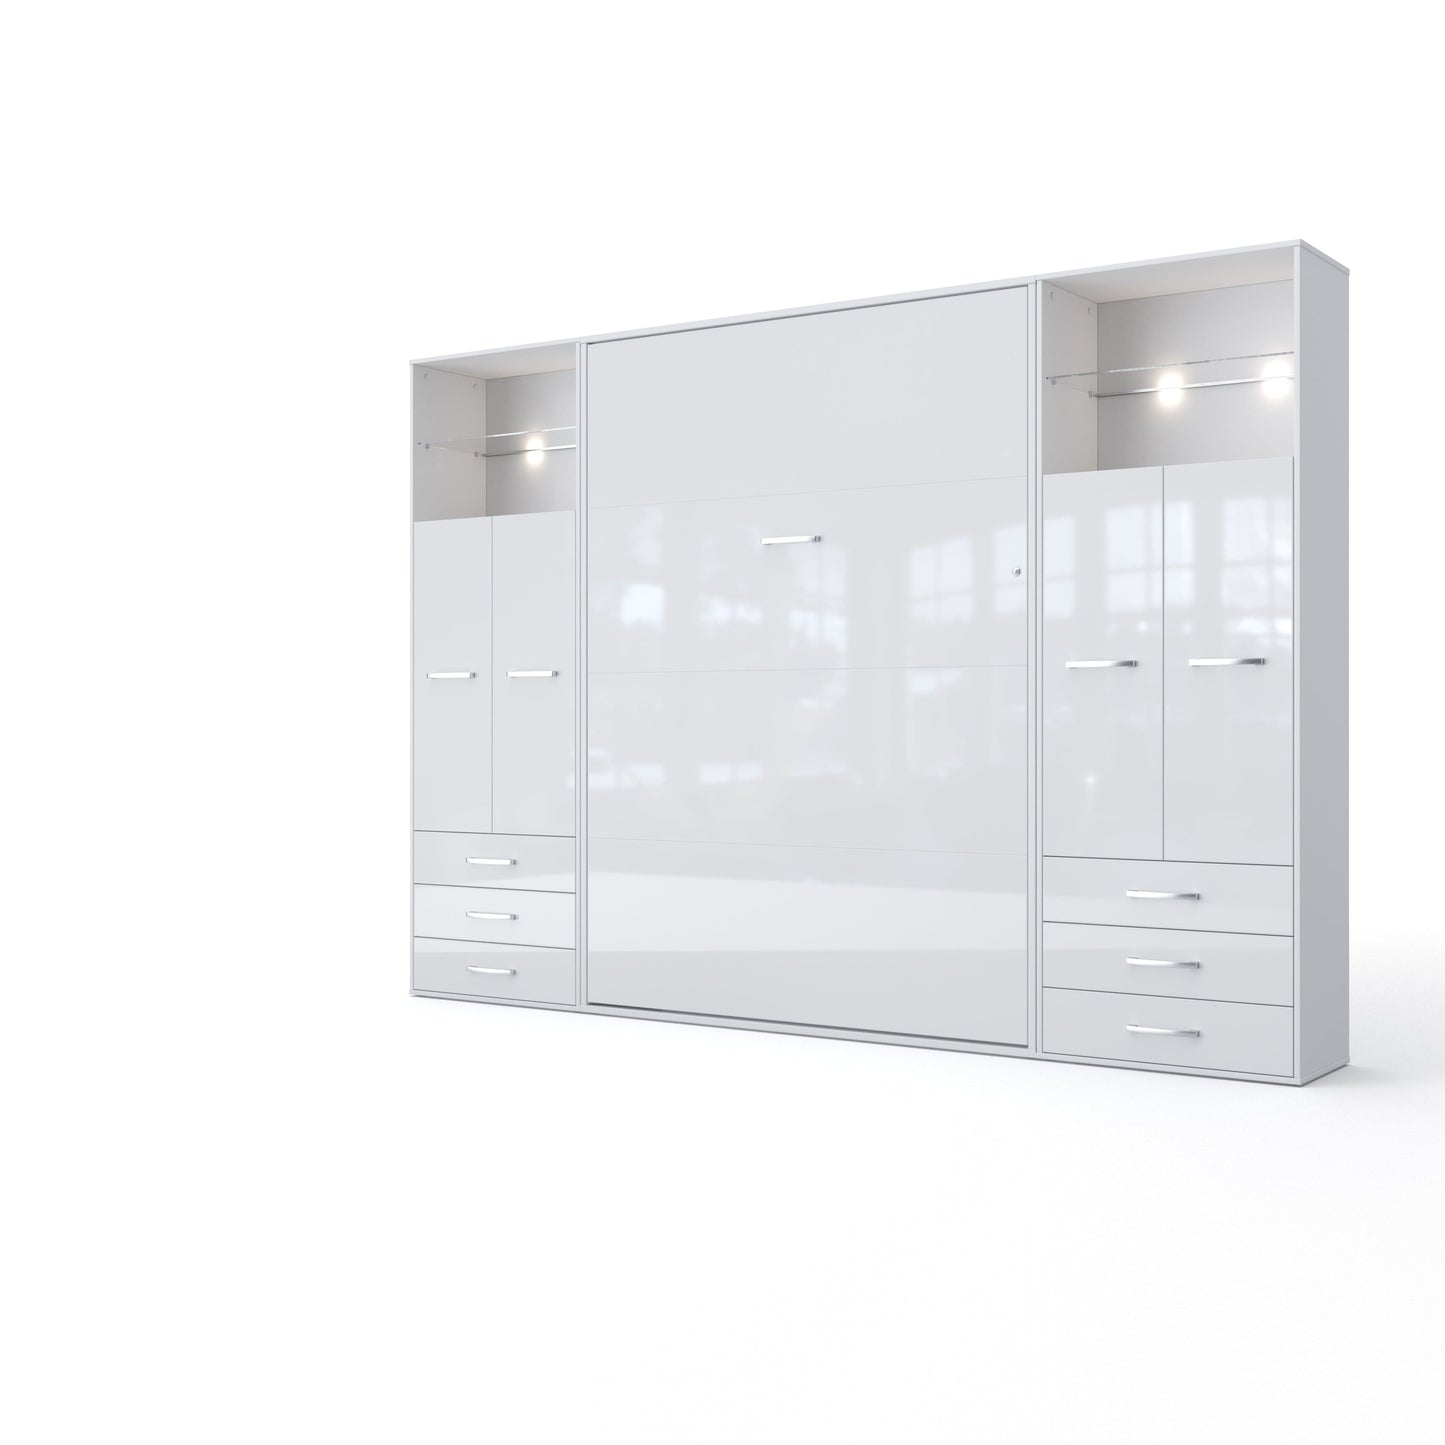 Maxima House Maxima House Vertical Wall Bed Invento, European Full Size with 2 cabinets White/White IN120V-10W